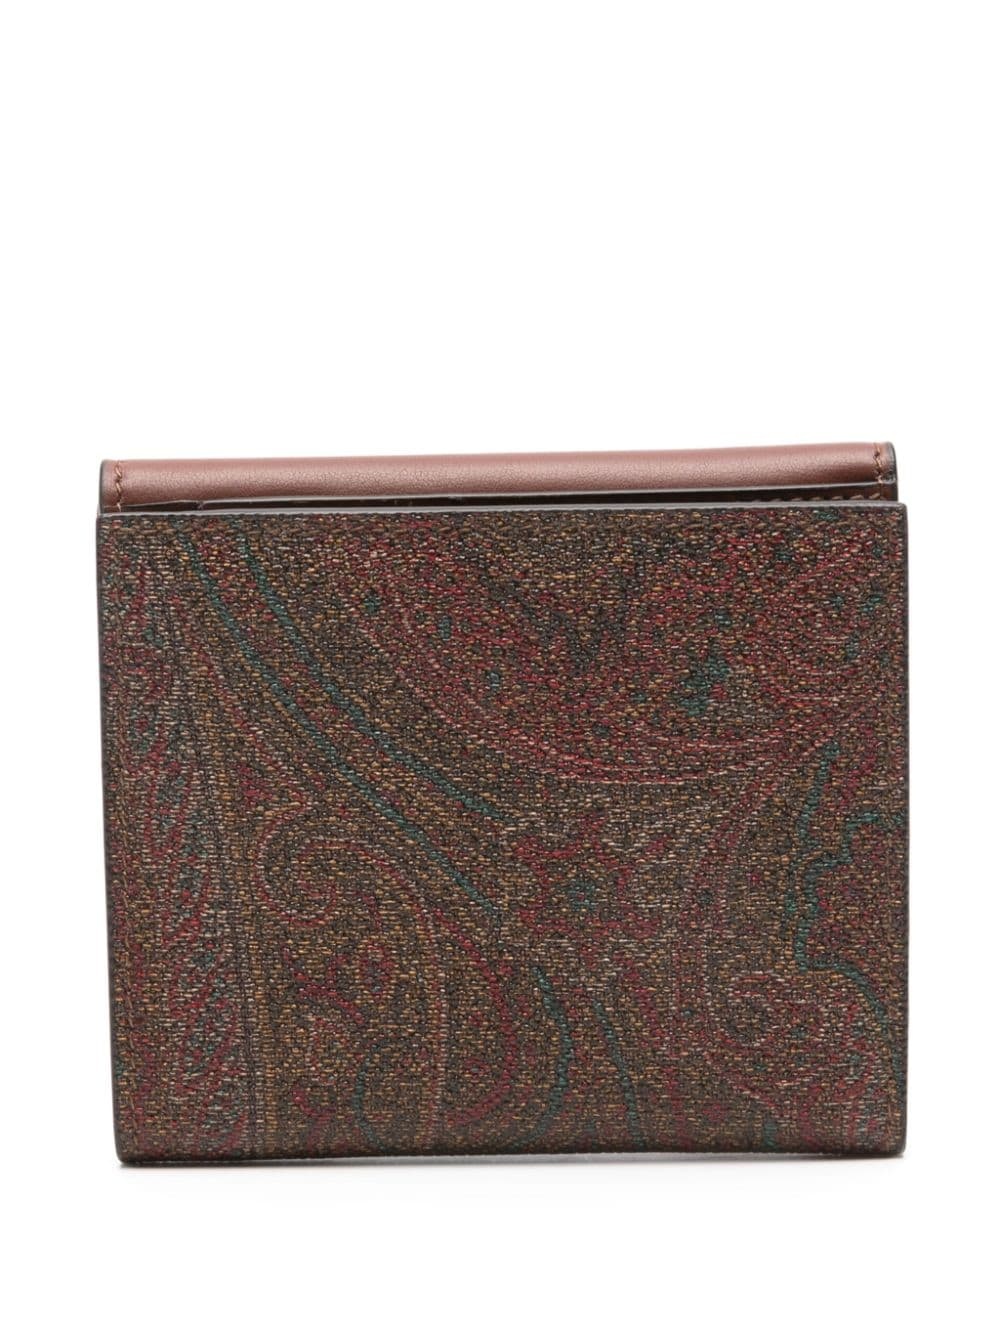 paisley textured leather wallet - 2